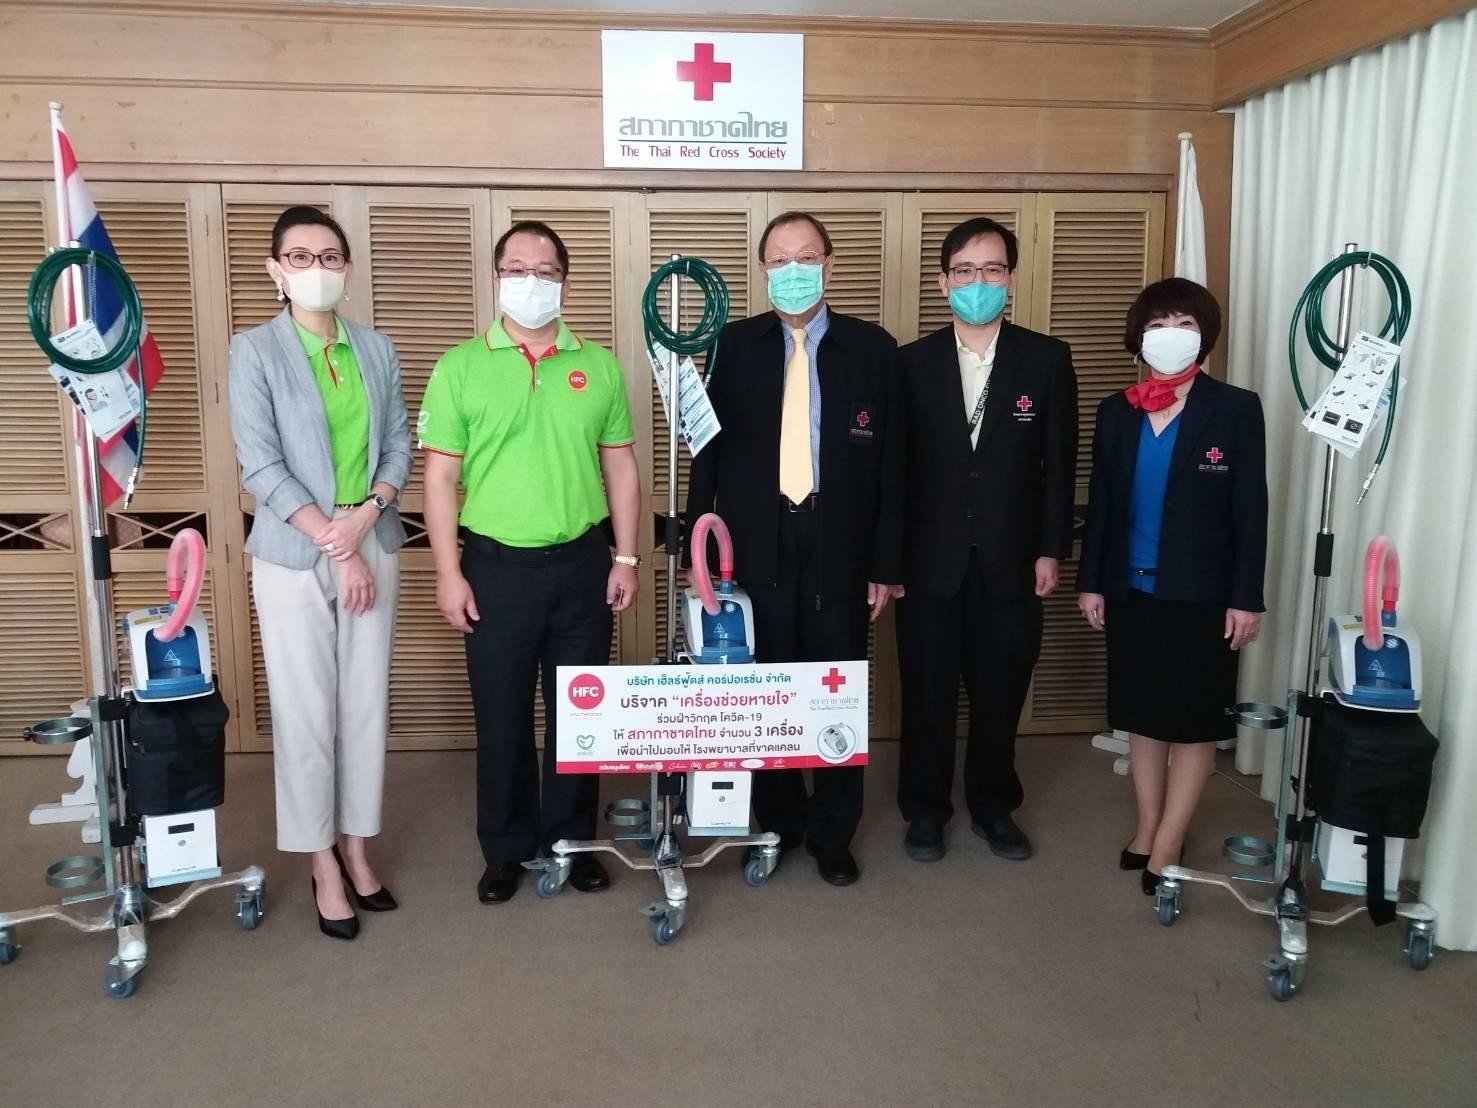 Passing on assistance to the community, Health Foods Corporation Limited donates the first set of respiratory aids to the Thai Red Cross Society to support COVID-19 patients.